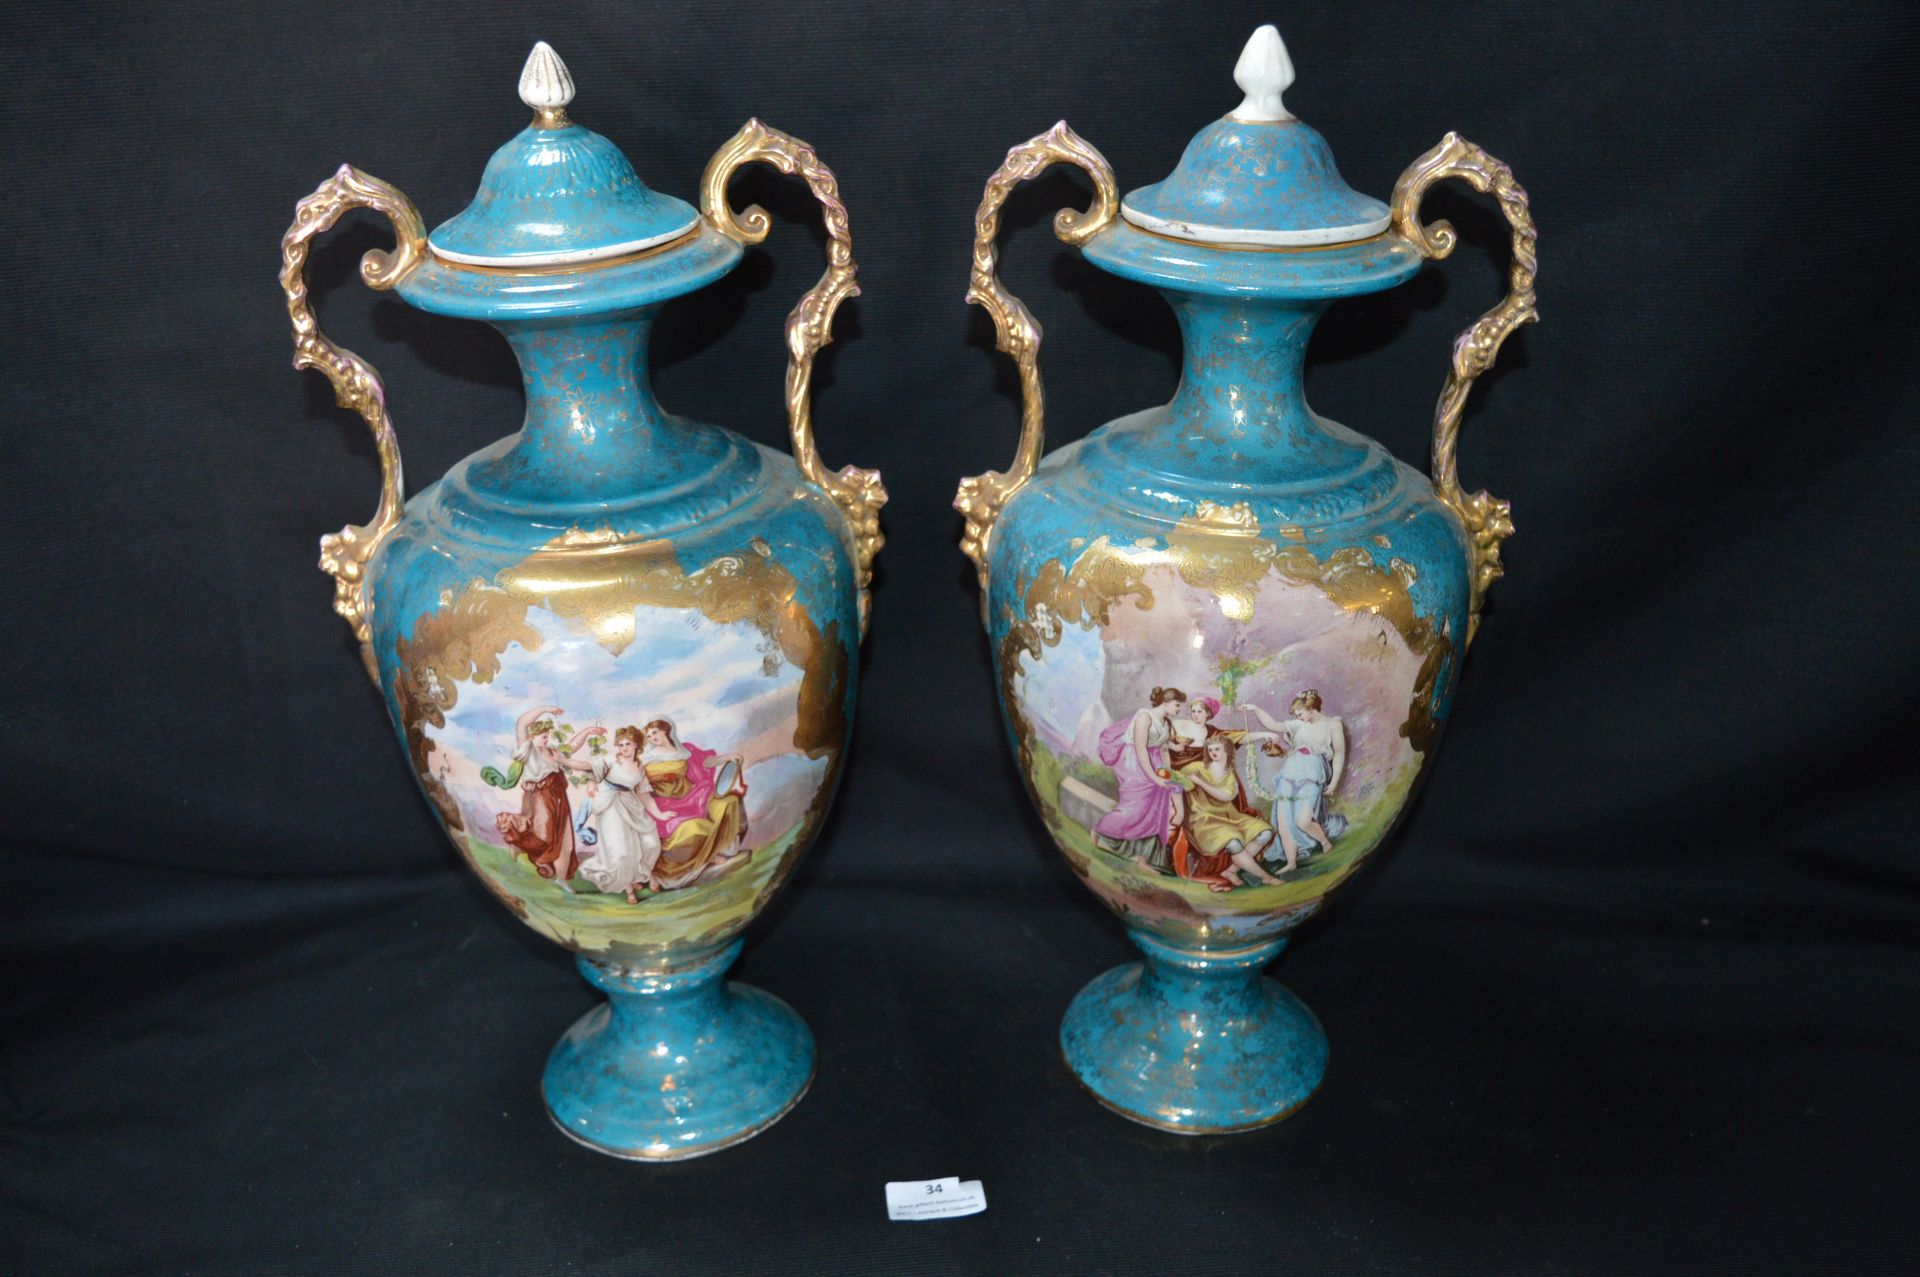 Pair of Ornate Classical Urns with Gilt Decoration